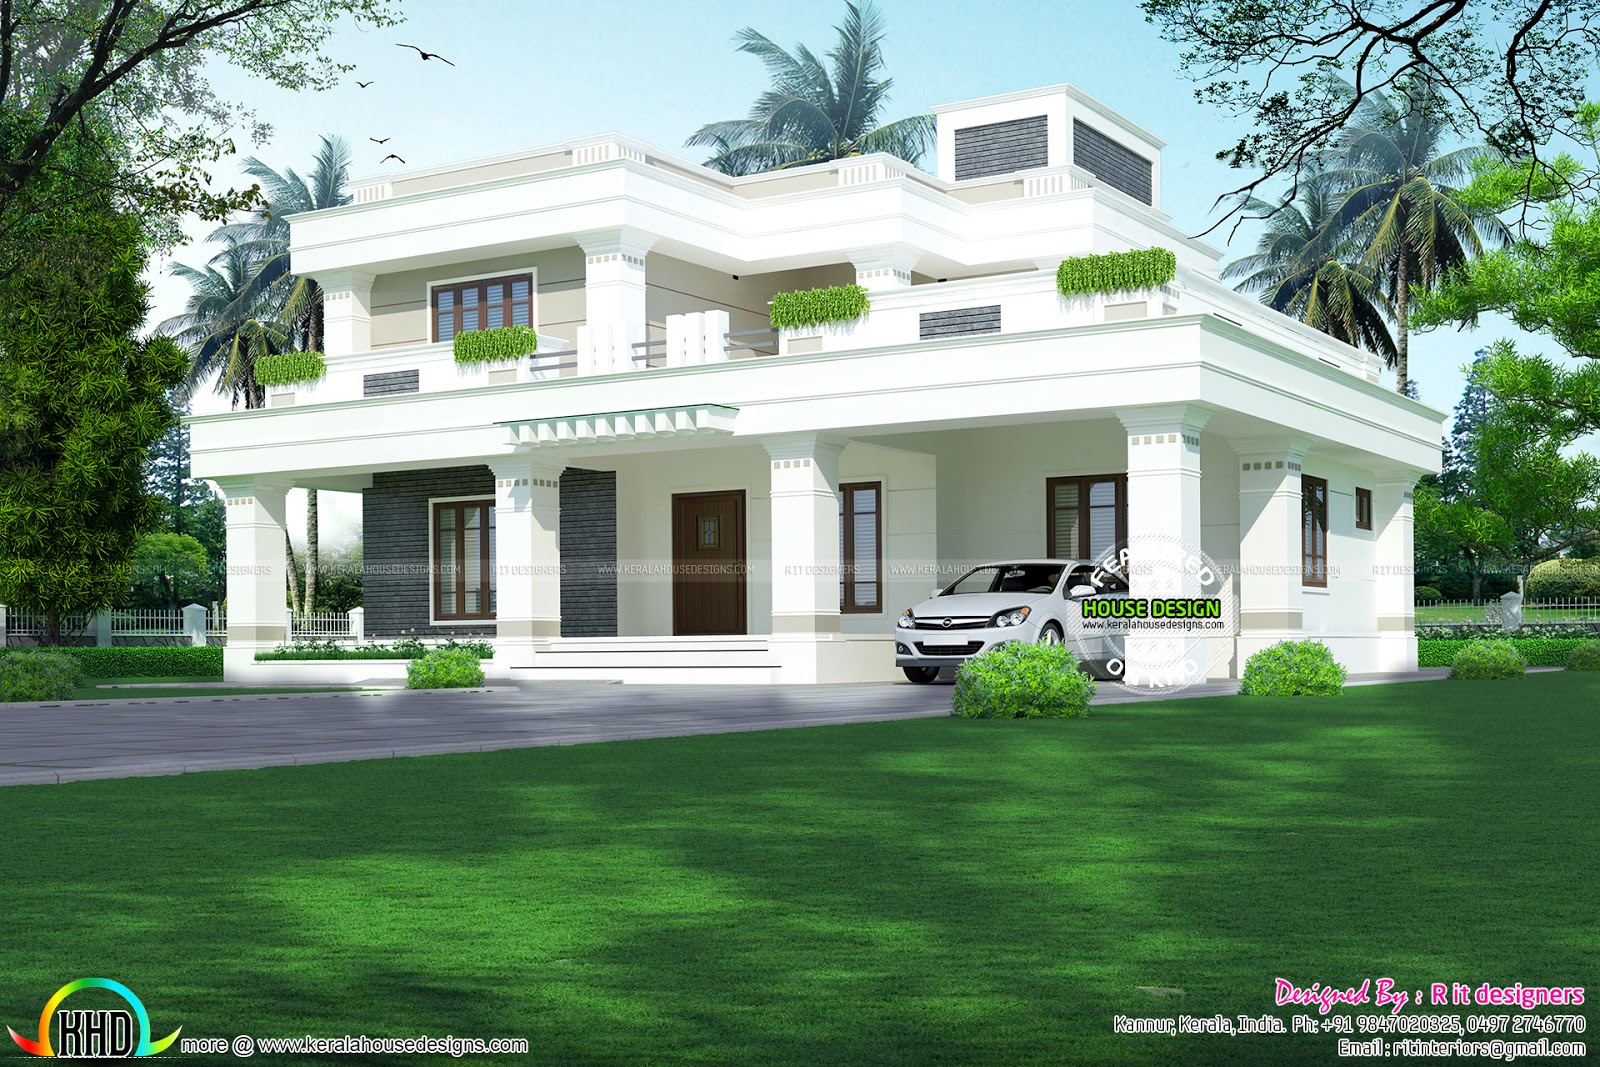 2969 sq-ft modern 4 BHK architecture home - Kerala home design and